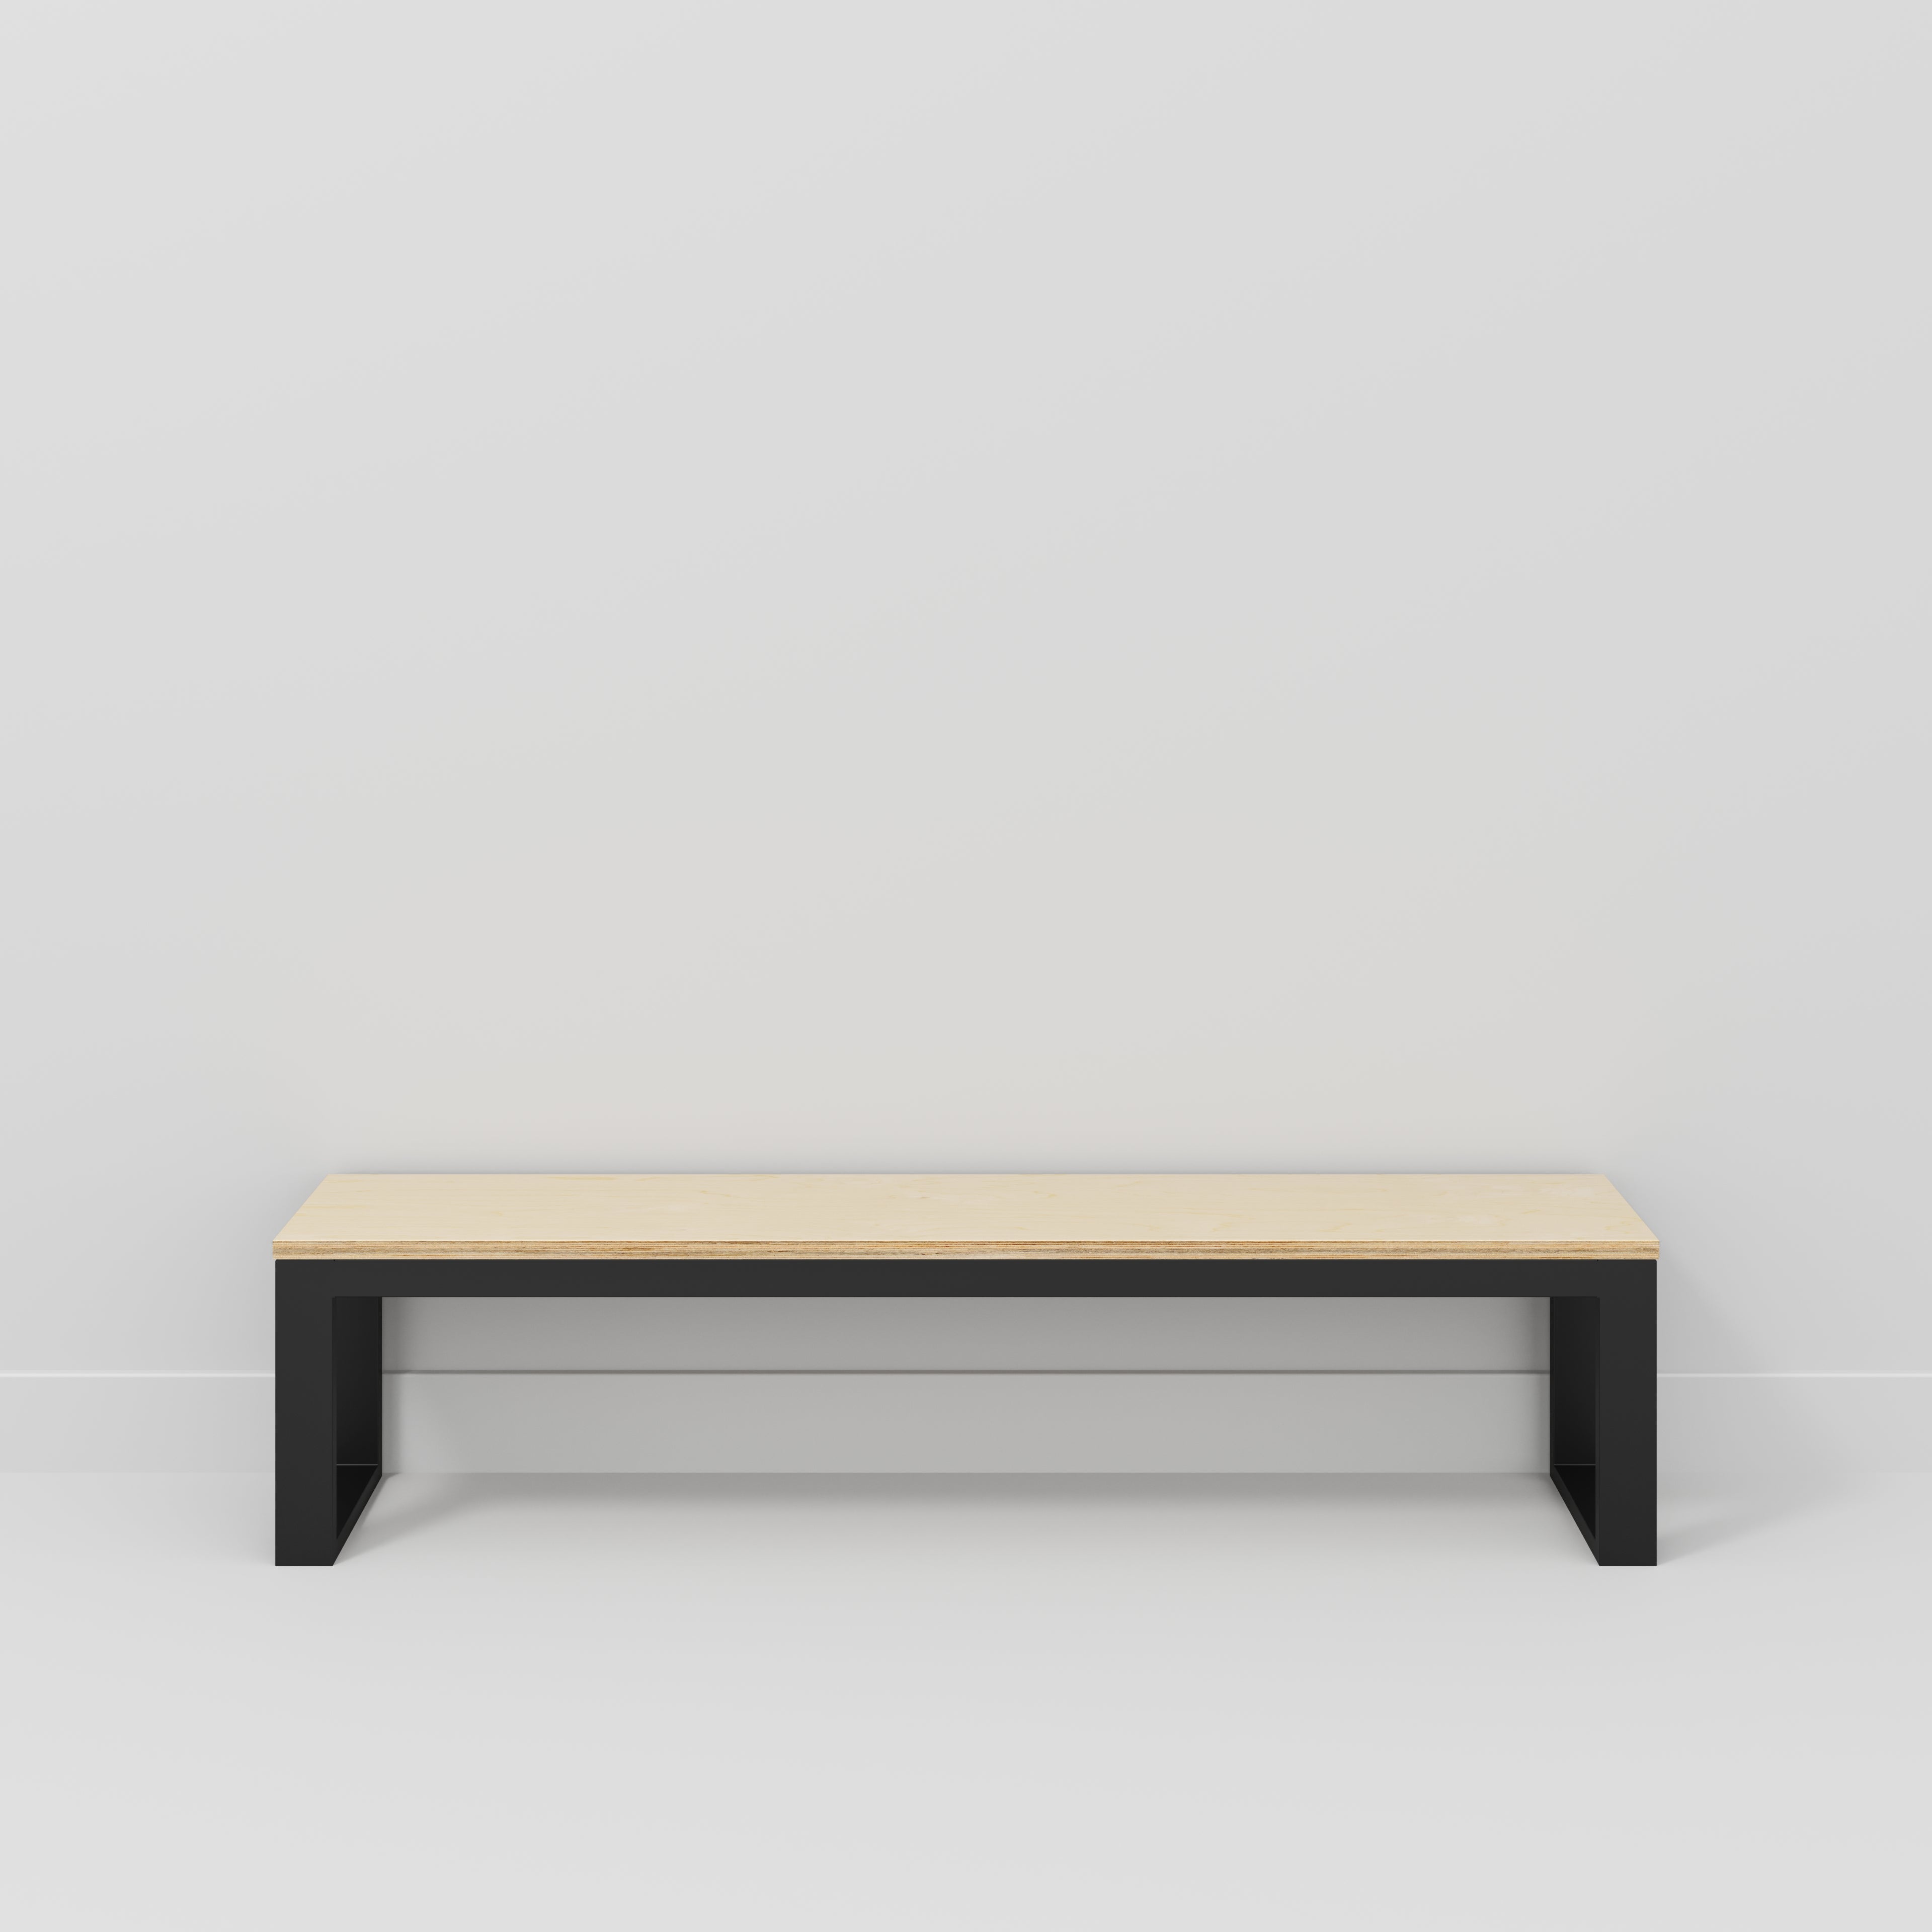 Bench Seat with Black Industrial Frame - Plywood Birch - 1800(w) x 325(d)